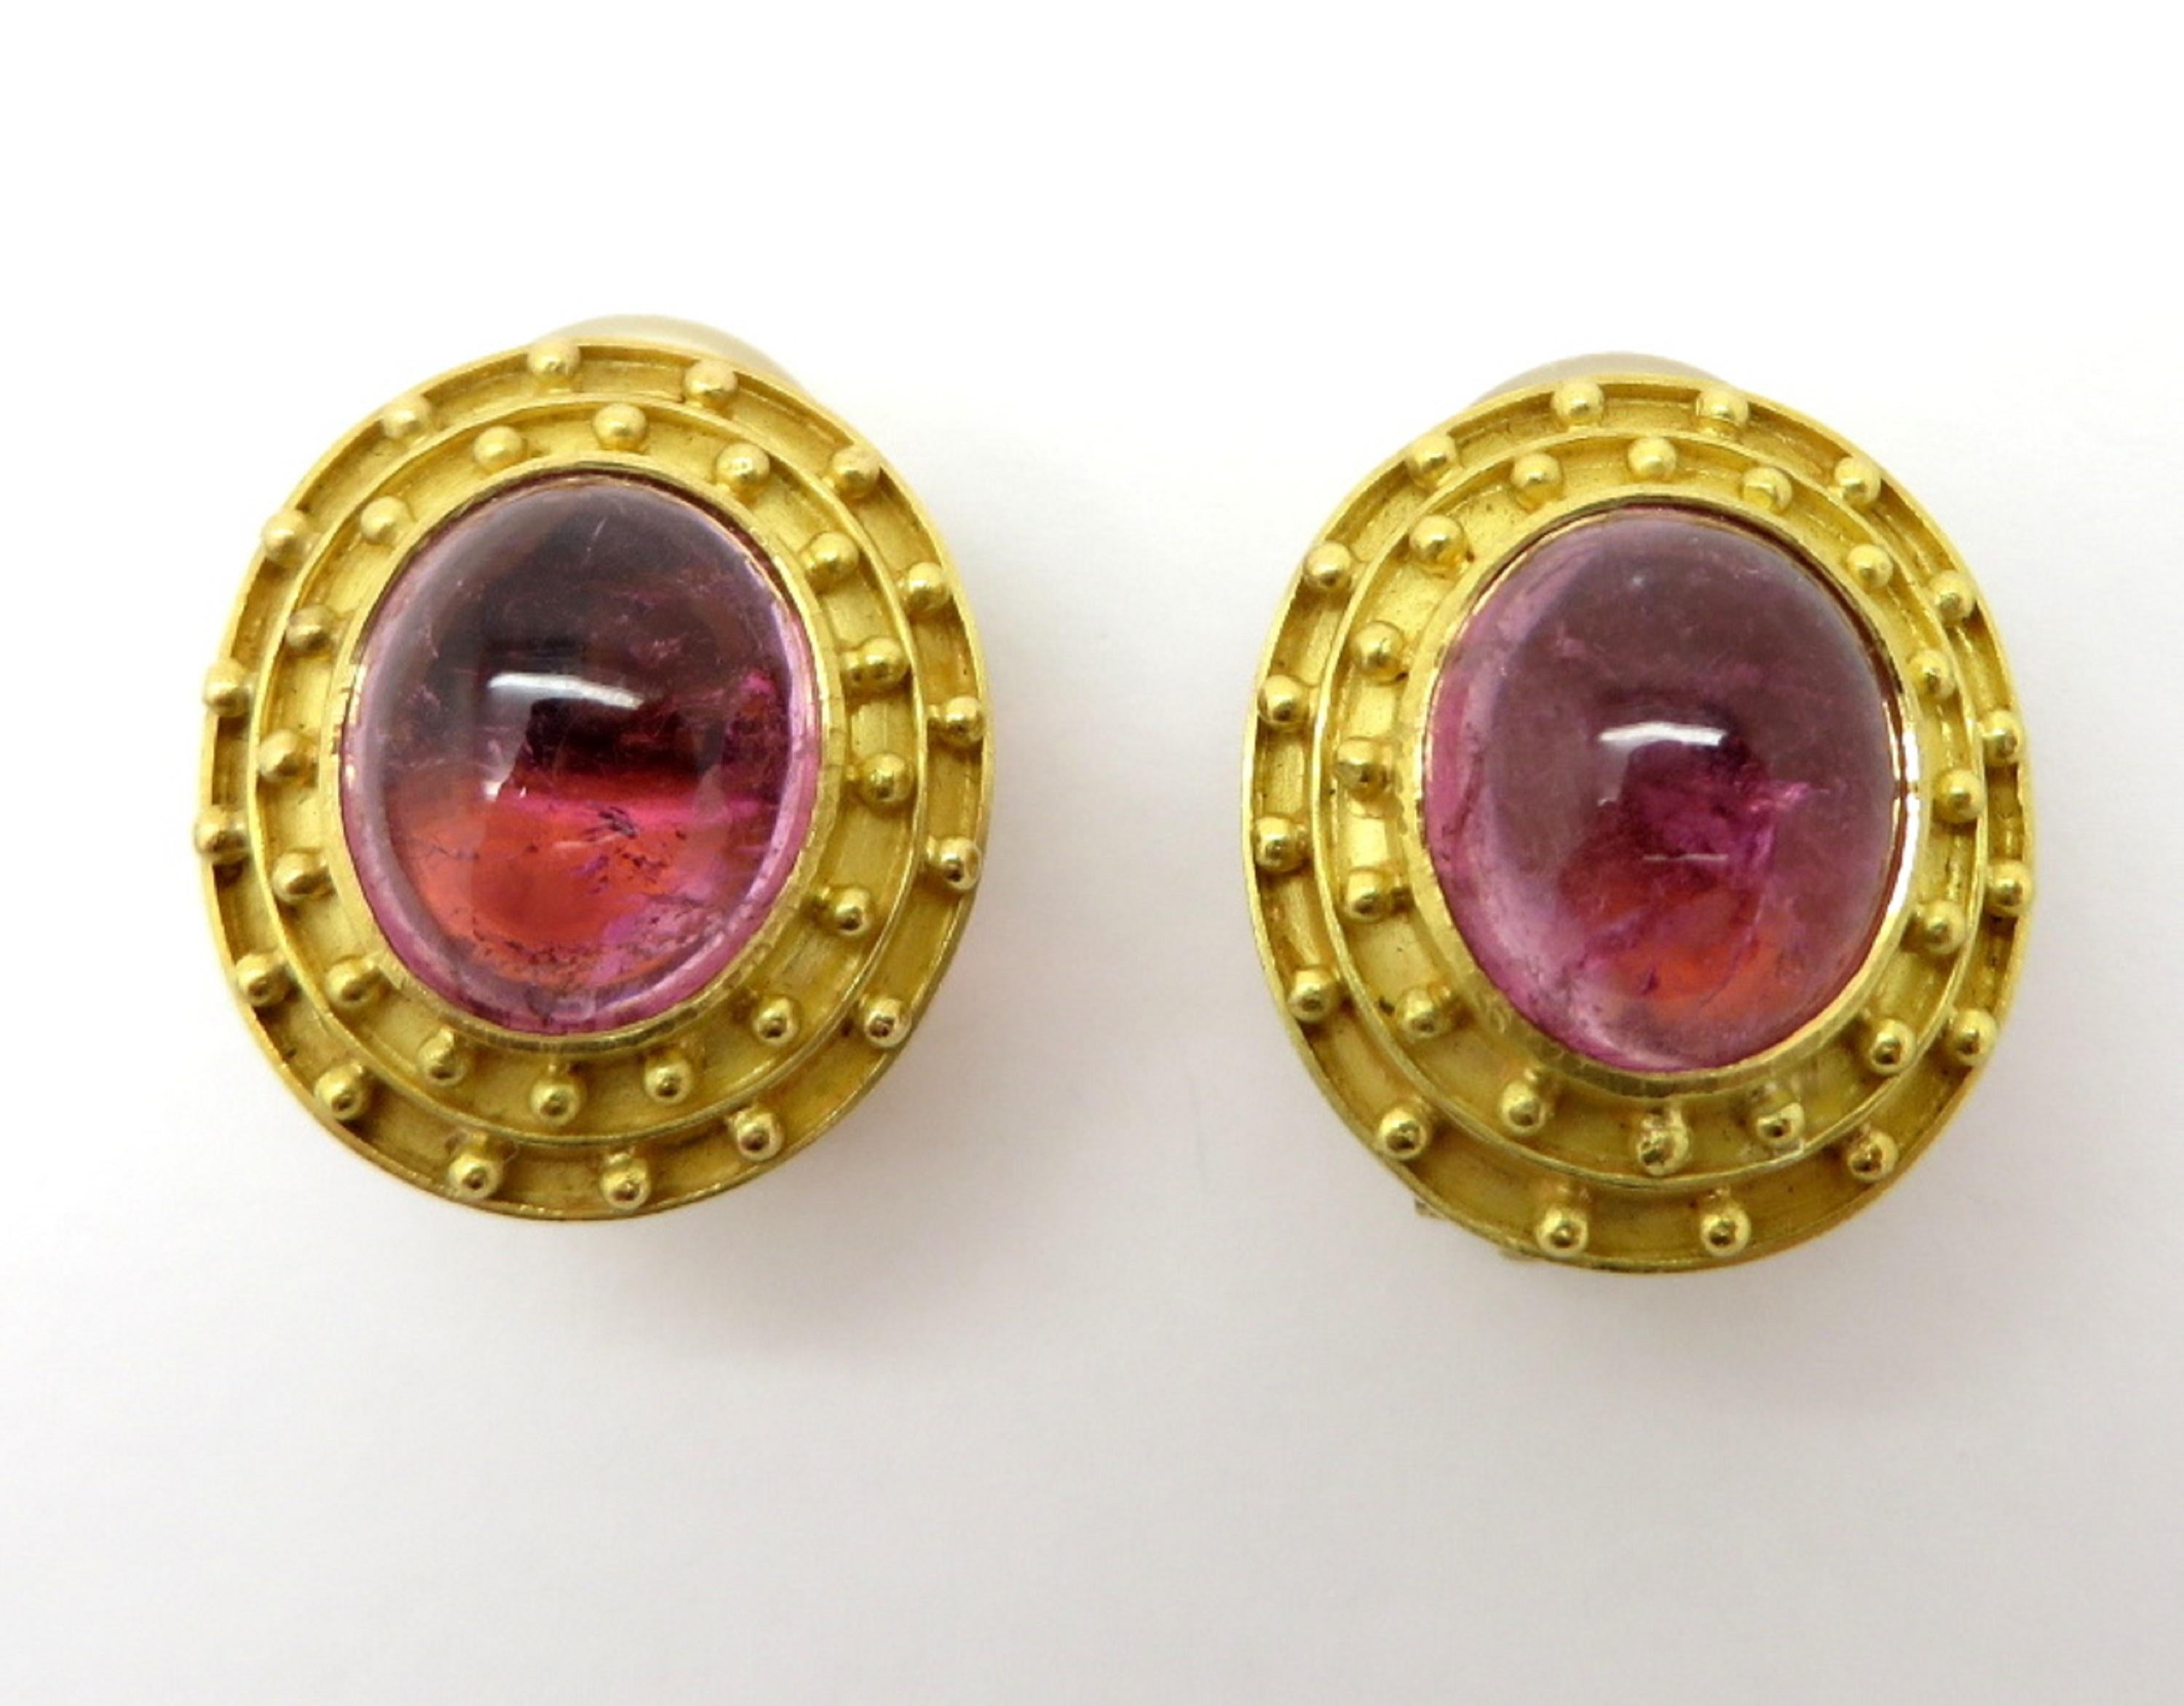 For sale is a designer pair of Elizabeth Locke Pink Tourmaline Oval Etruscan Earrings set in 18K Yellow Gold!
Two oval cabochon Pink Tourmalines are bezel set in a double beaded Etruscan halo design.
The earrings are convertible so you can wear them